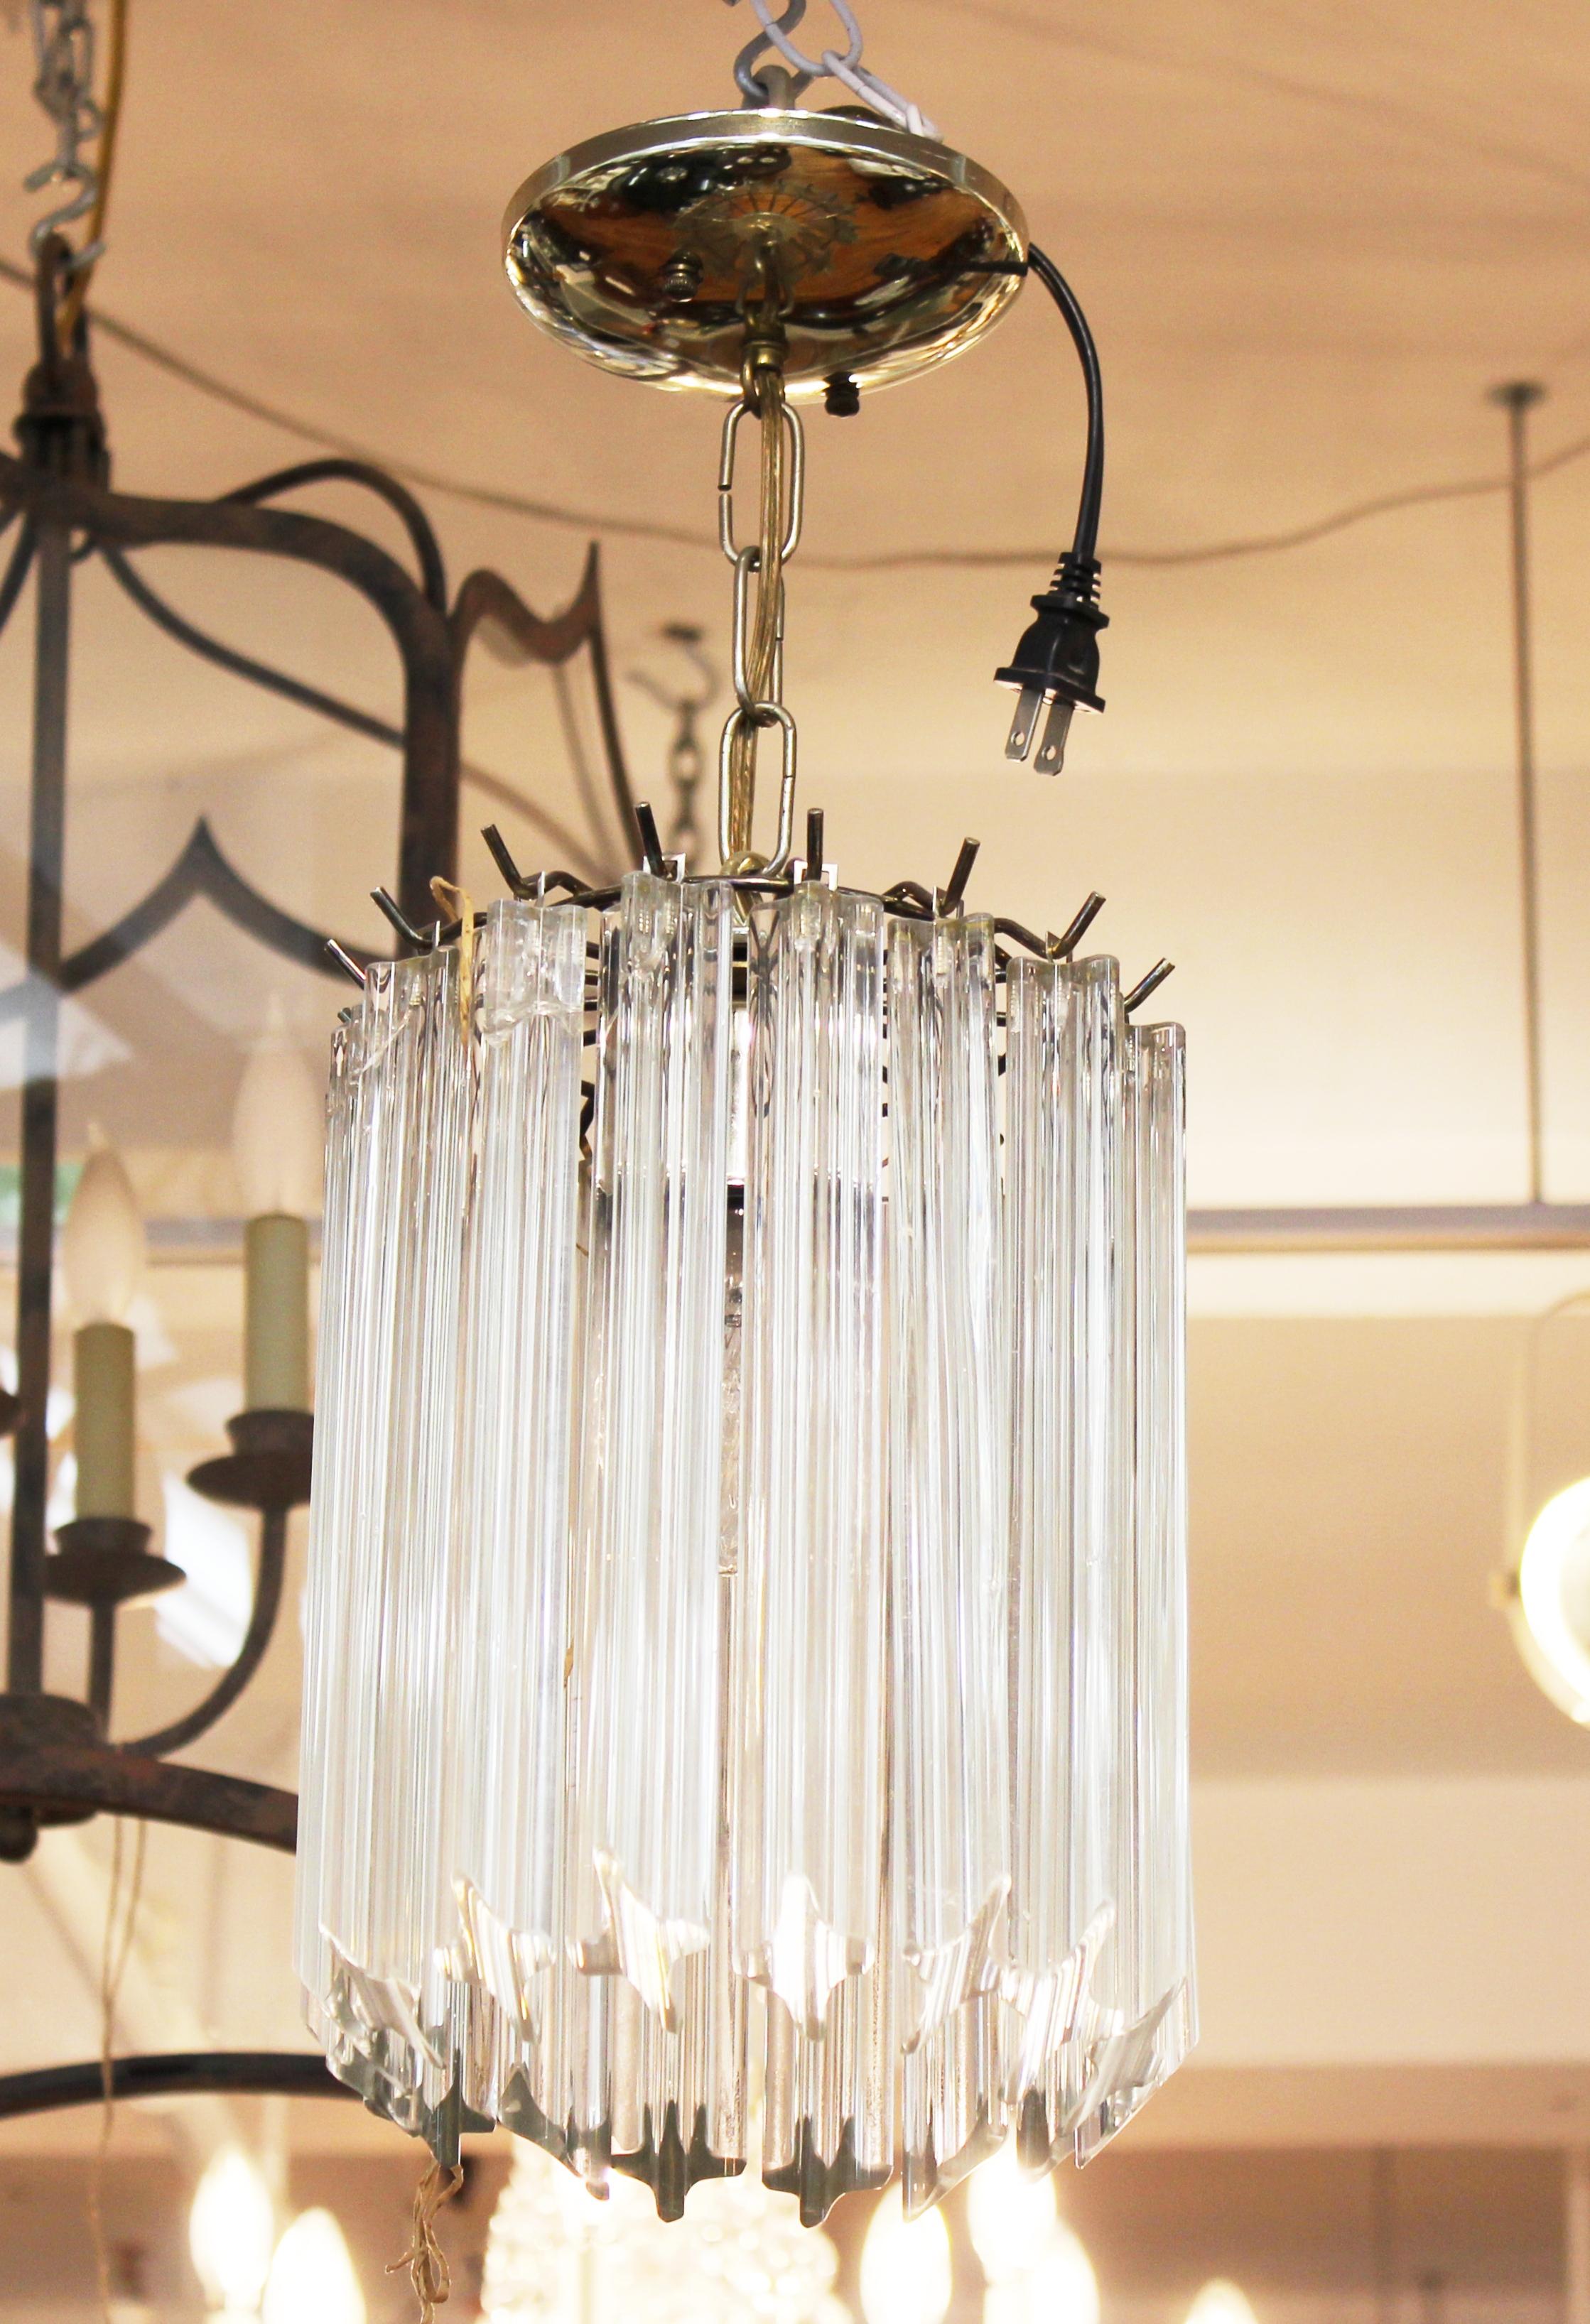 Italian Mid-Century Modern diminutive glass chandelier pendant in the style of Venini, possibly made by Camer, circa 1970's.